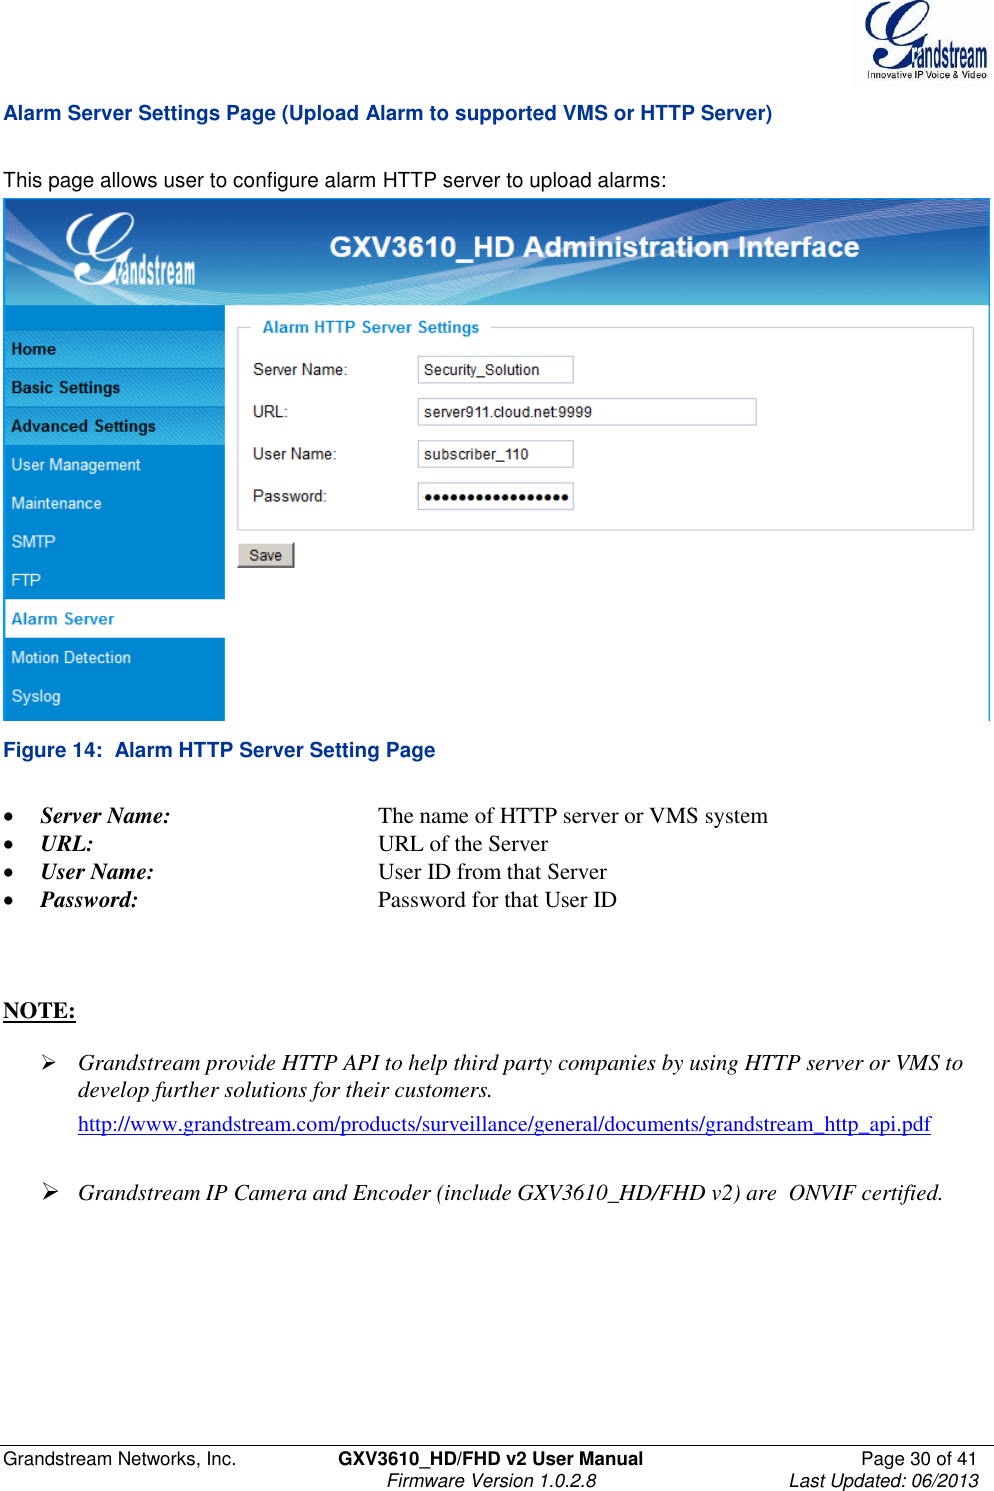  Grandstream Networks, Inc.  GXV3610_HD/FHD v2 User Manual  Page 30 of 41    Firmware Version 1.0.2.8  Last Updated: 06/2013  Alarm Server Settings Page (Upload Alarm to supported VMS or HTTP Server)  This page allows user to configure alarm HTTP server to upload alarms:  Figure 14:  Alarm HTTP Server Setting Page   Server Name:       The name of HTTP server or VMS system  URL:         URL of the Server  User Name:       User ID from that Server  Password:        Password for that User ID    NOTE:    Grandstream provide HTTP API to help third party companies by using HTTP server or VMS to develop further solutions for their customers.  http://www.grandstream.com/products/surveillance/general/documents/grandstream_http_api.pdf    Grandstream IP Camera and Encoder (include GXV3610_HD/FHD v2) are  ONVIF certified.         